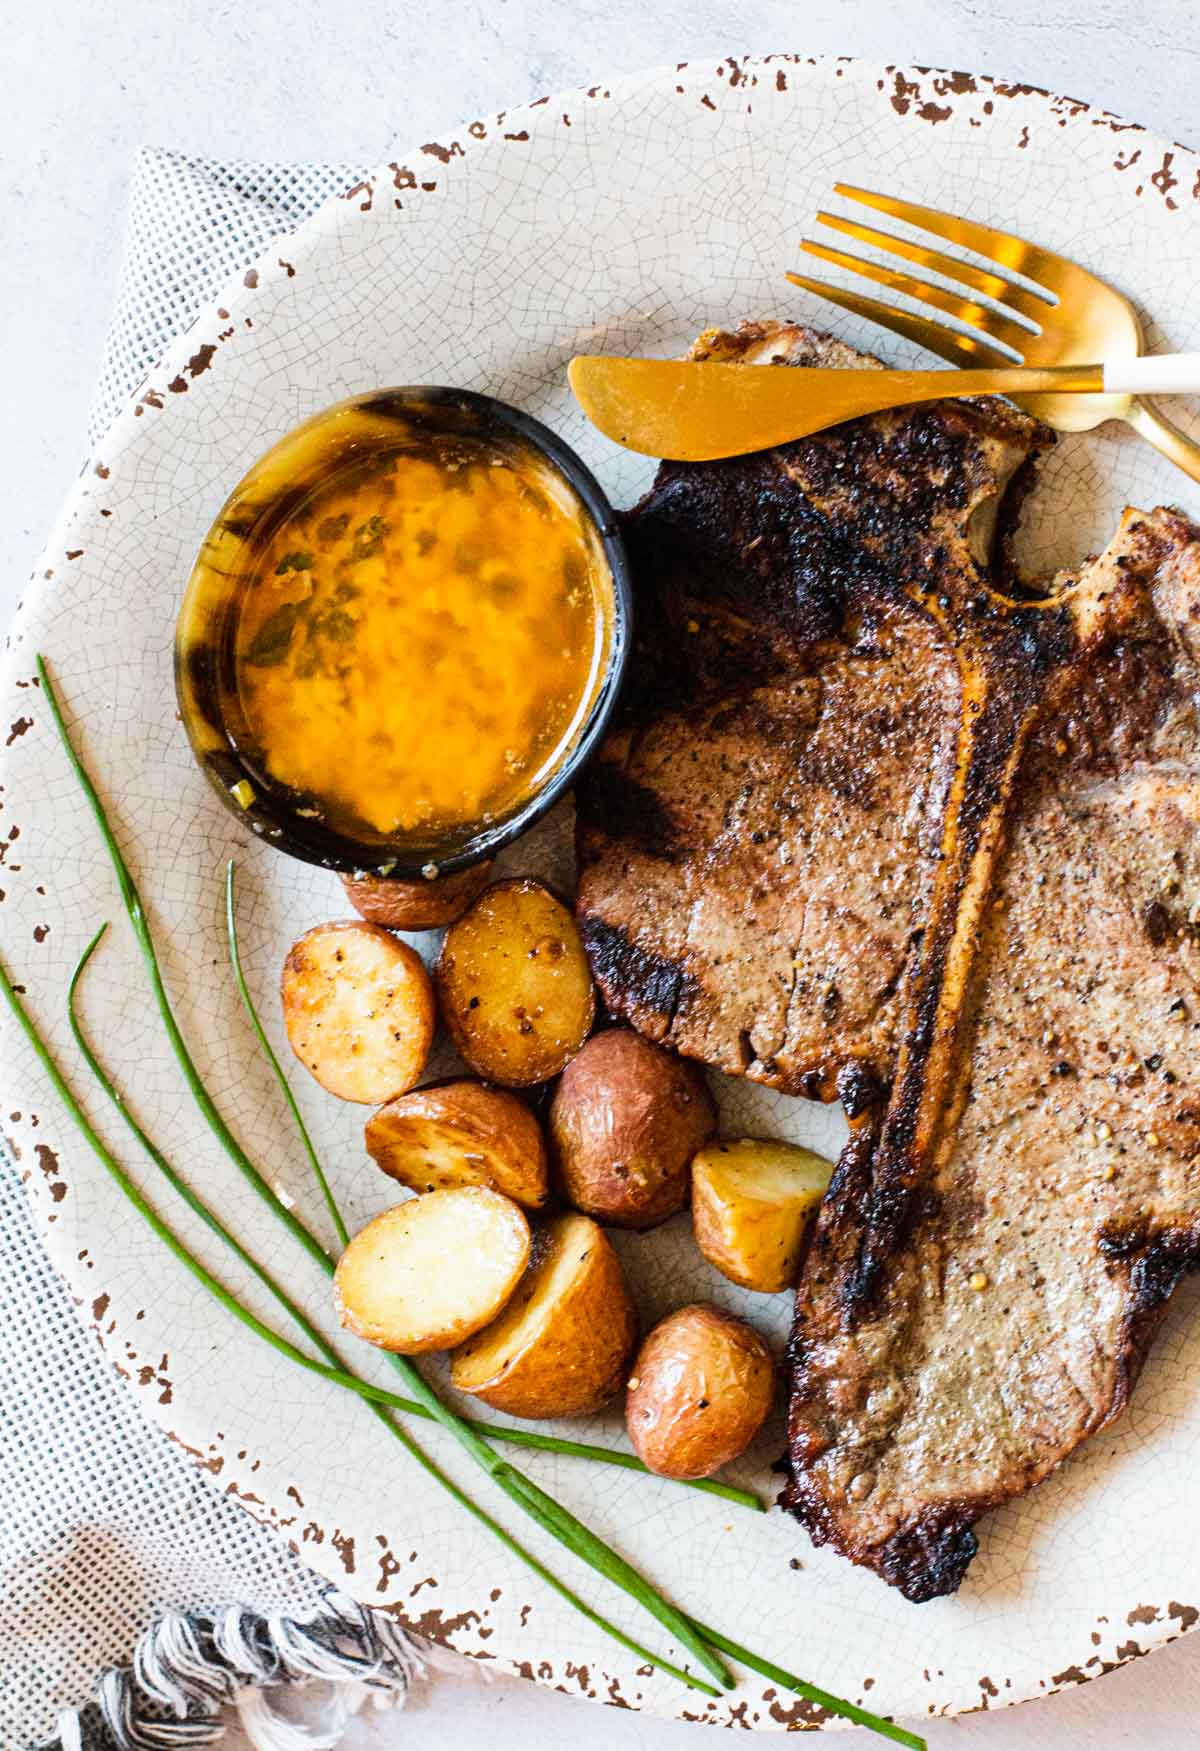 Grilled t-bone steaks served with potatoes and cowboy butter dipping sauce.